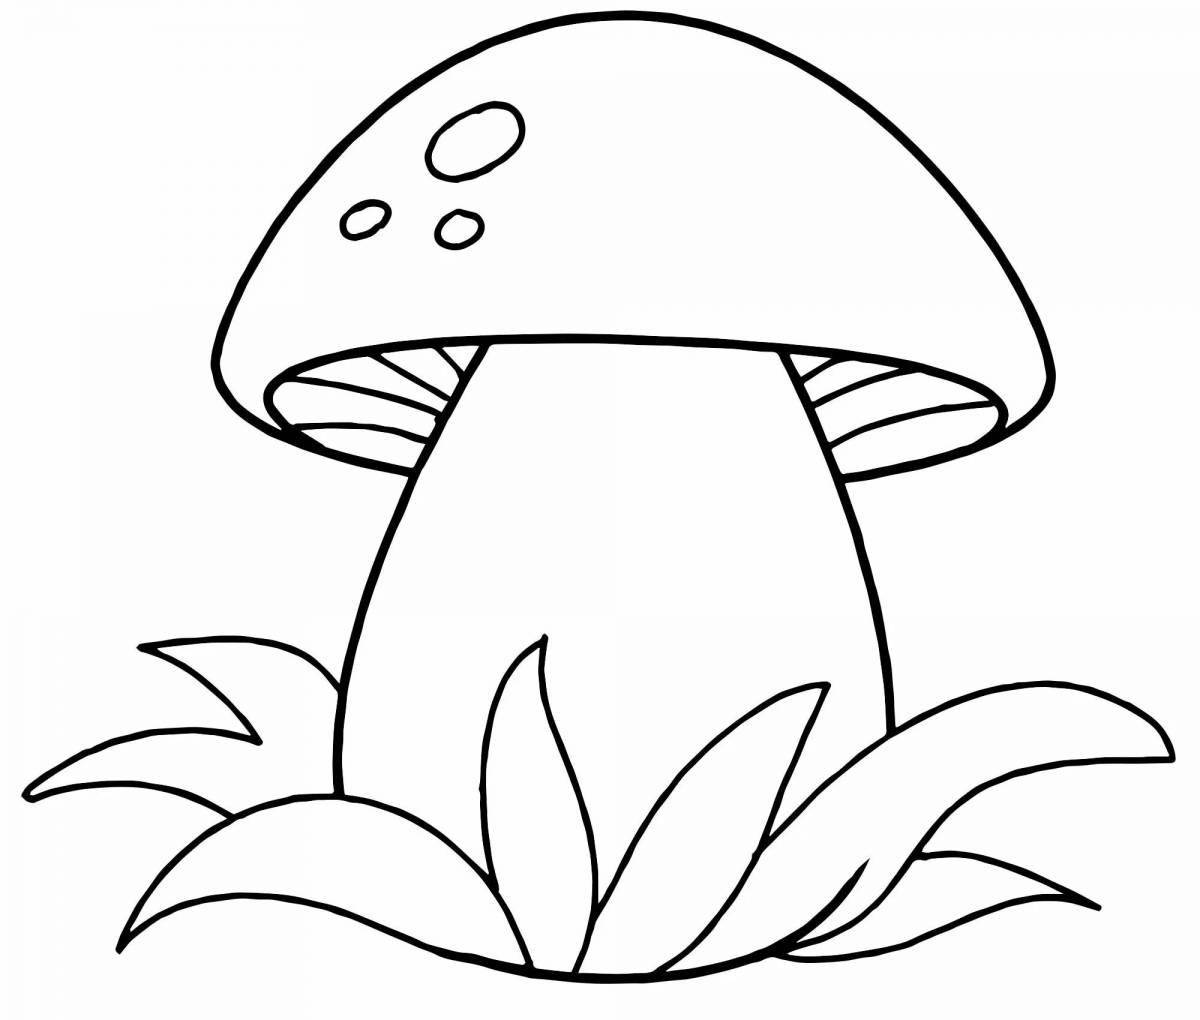 Attractive white mushroom coloring book for kids